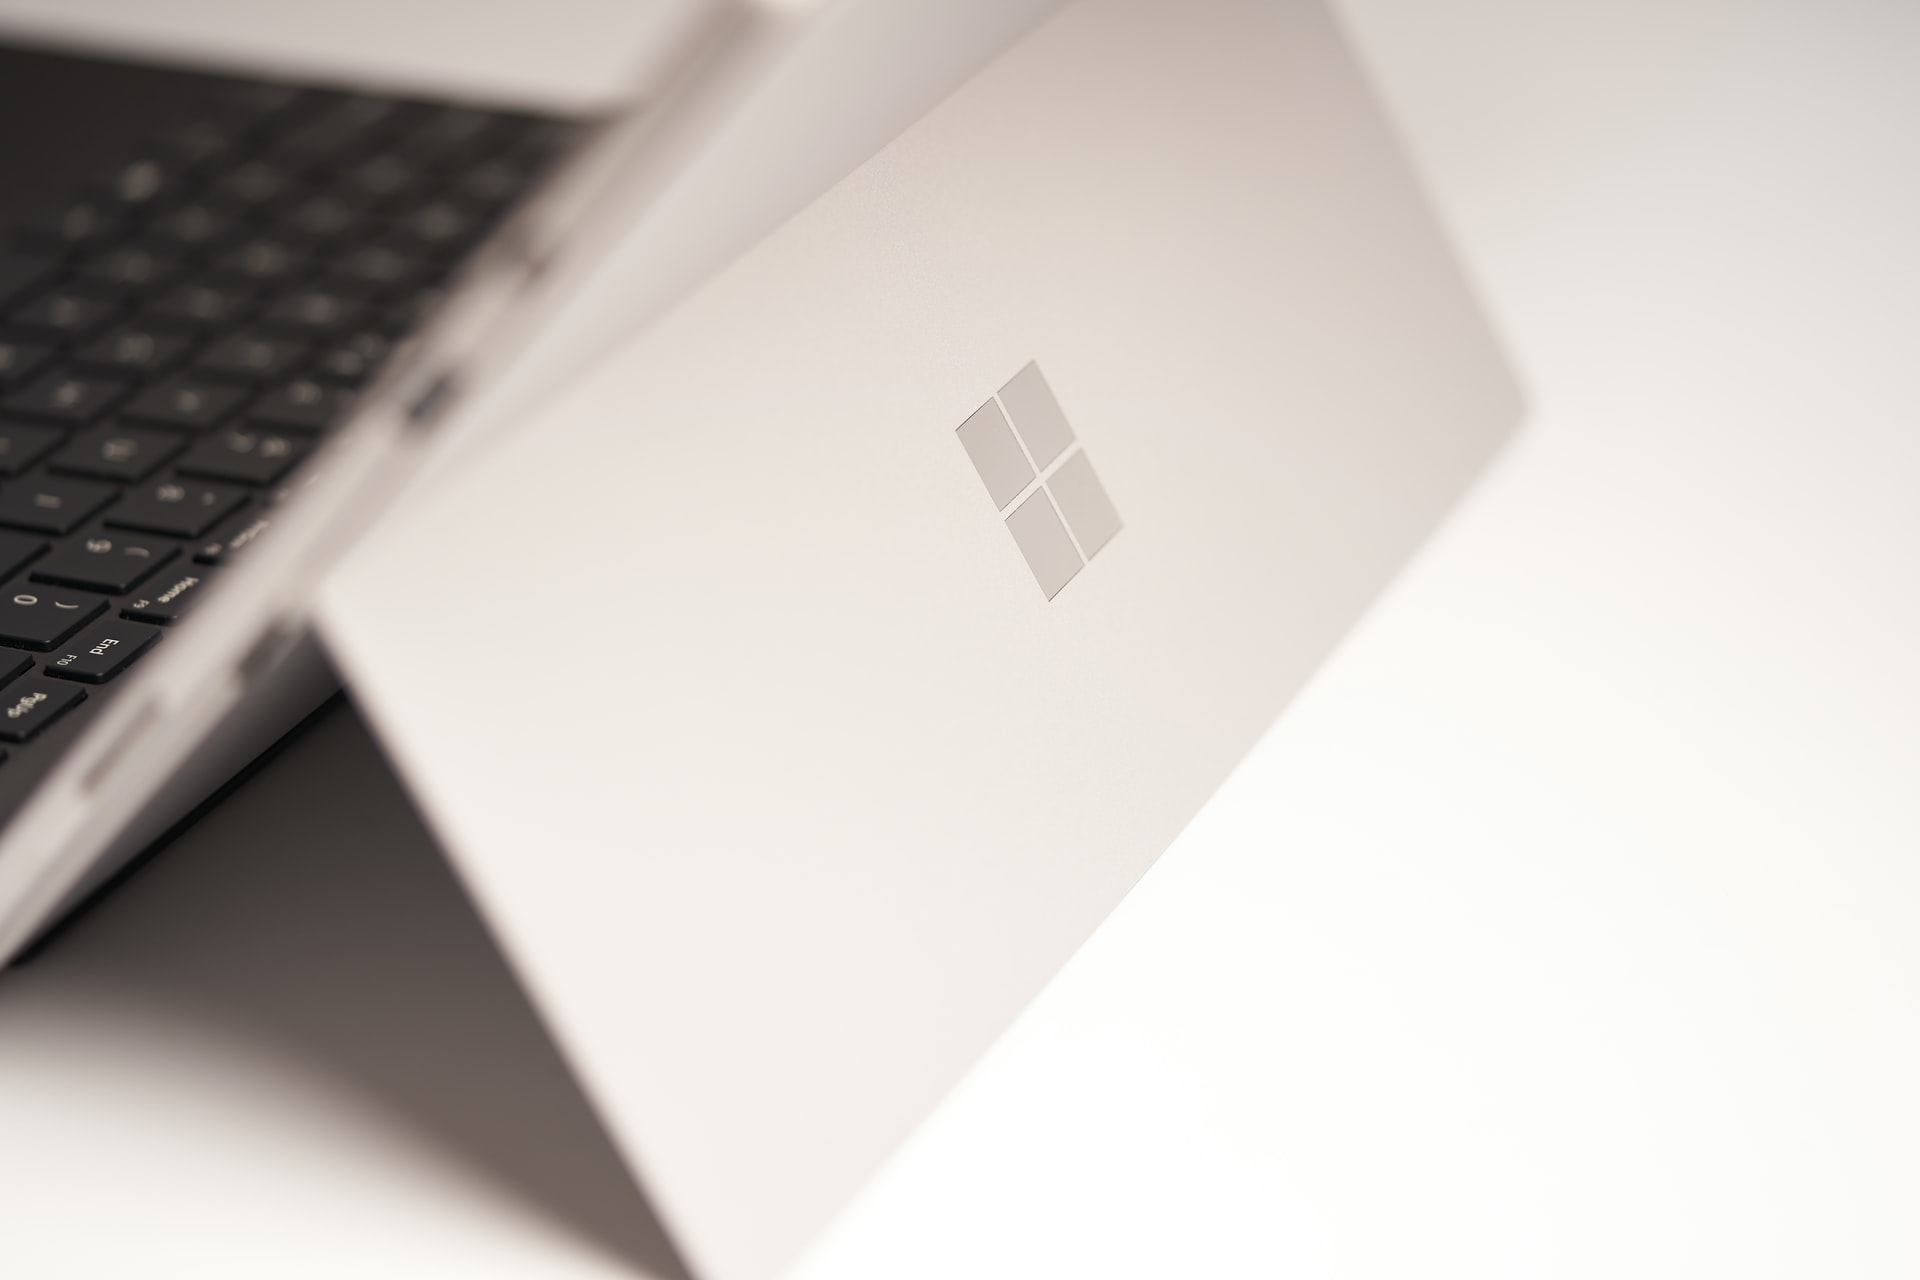 Microsoft Surface Pro 8 will get 120Hz display and Thunderbolt support